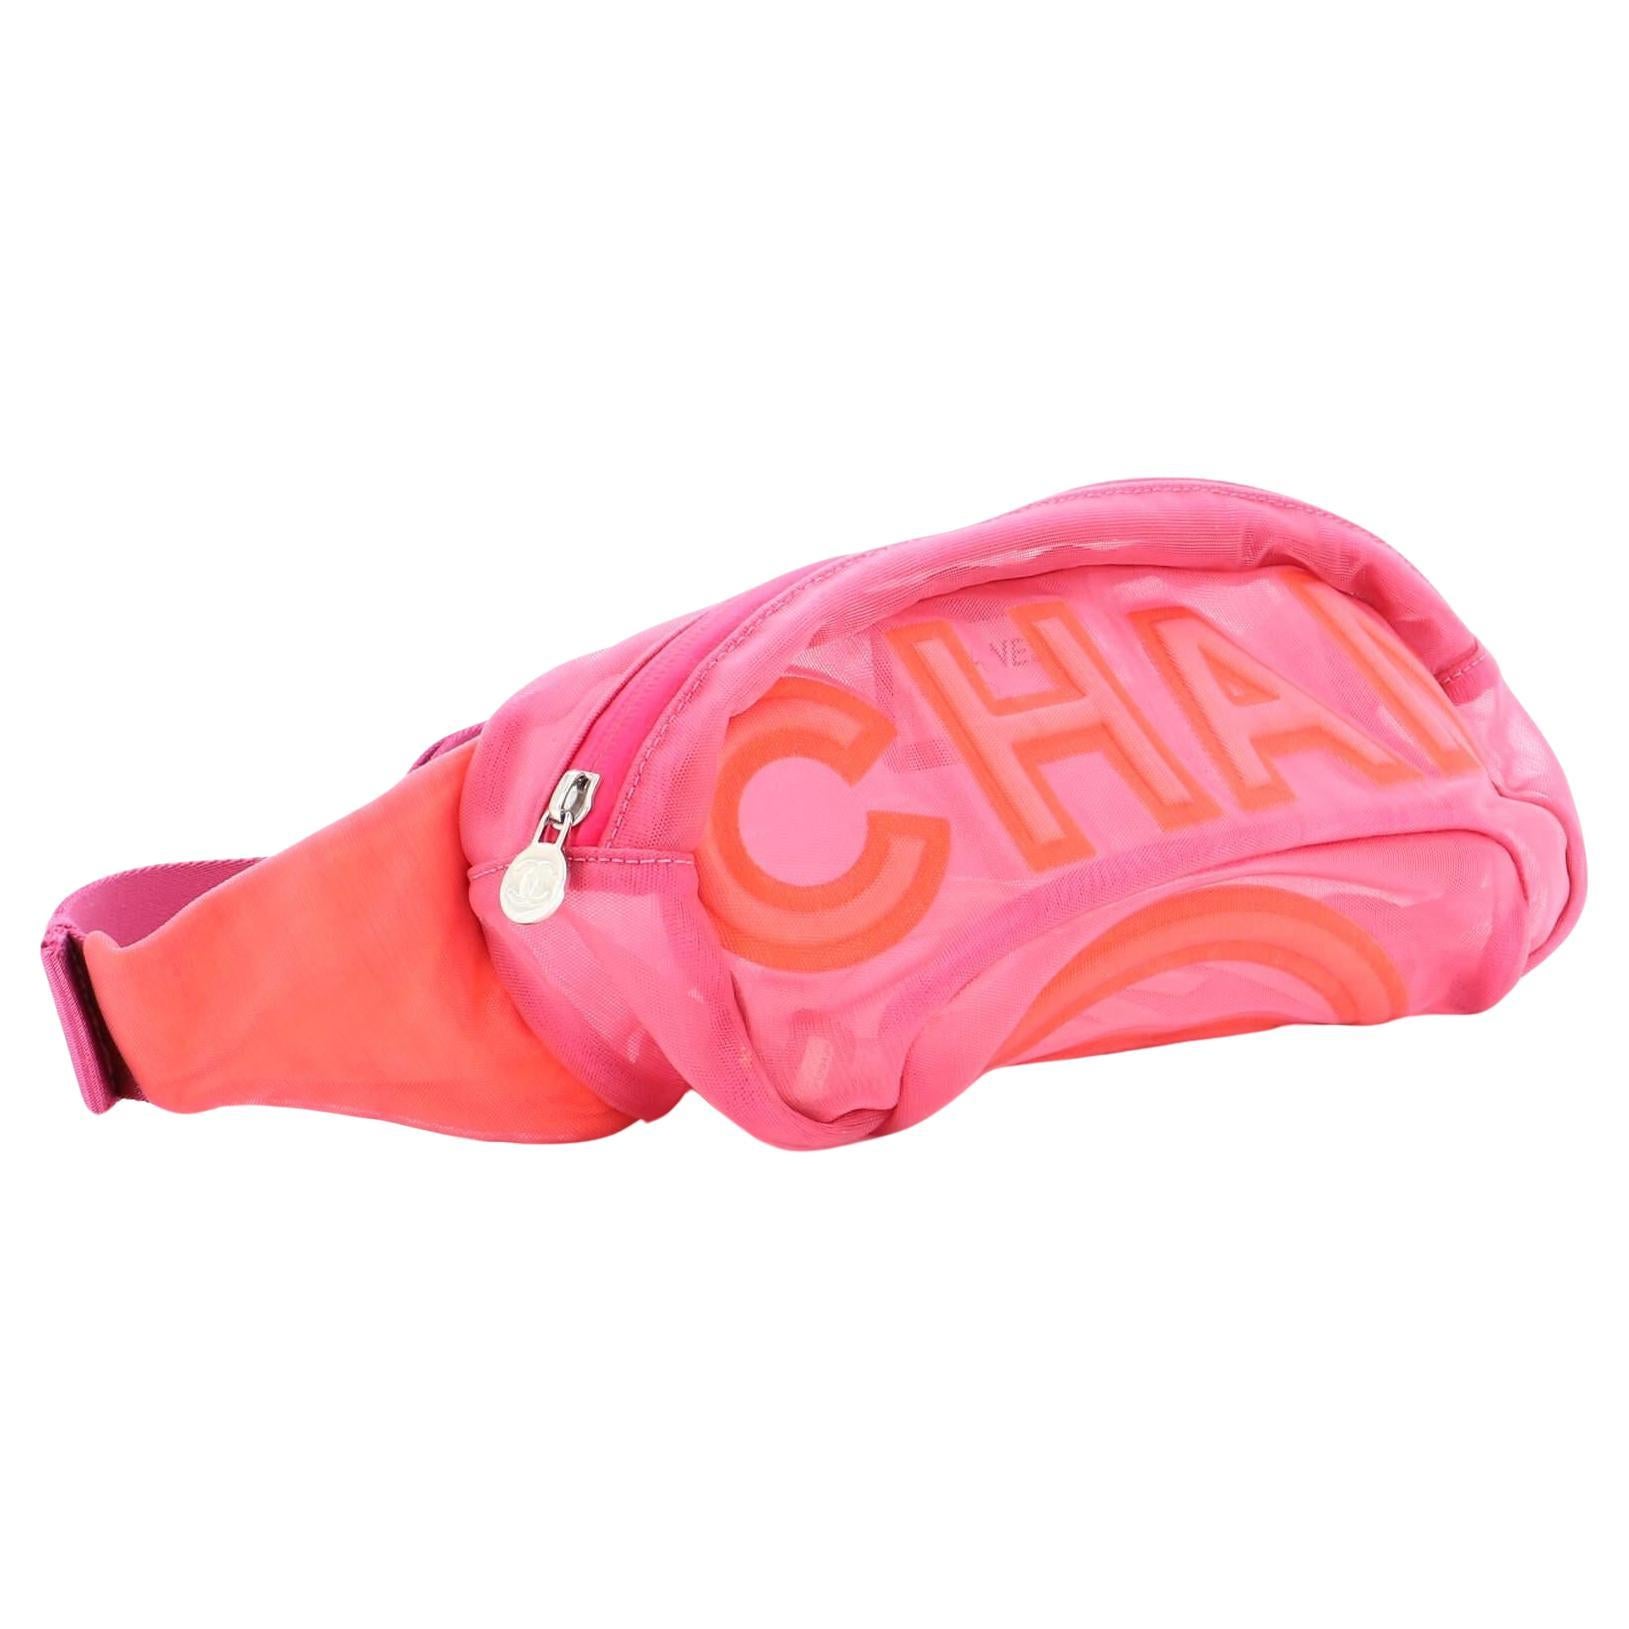 Chanel 2019 Logo Magenta Neon Pink Nylon Mesh CC Waist Fanny Pack Belt Bag In Good Condition For Sale In Miami, FL